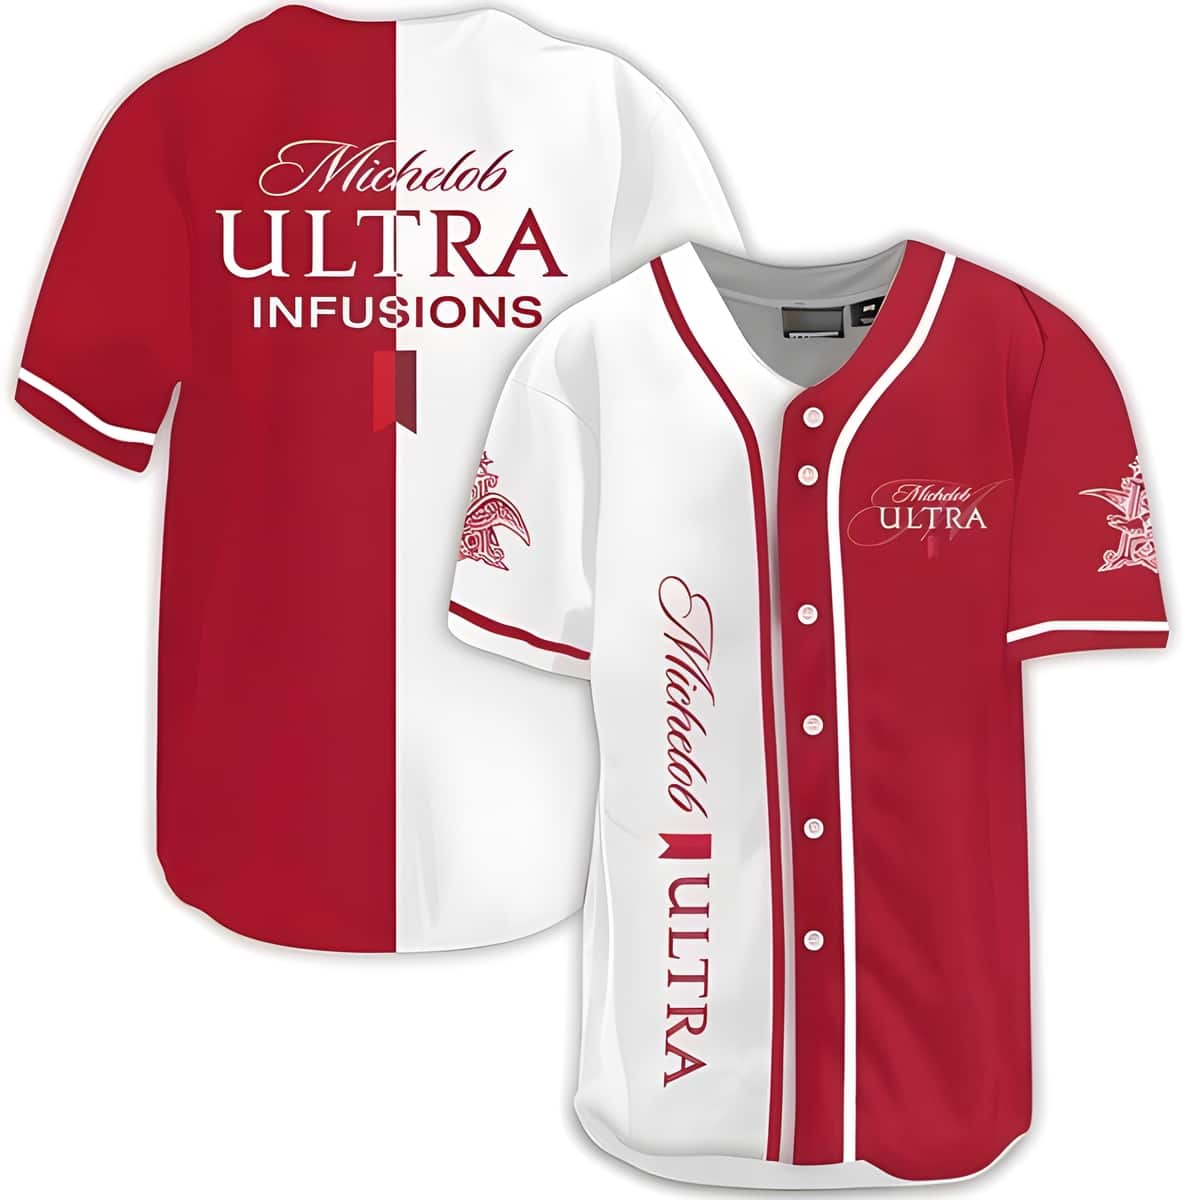 Michelob ULTRA Baseball Jersey Red White Dual Colors Gift For Beer Lovers